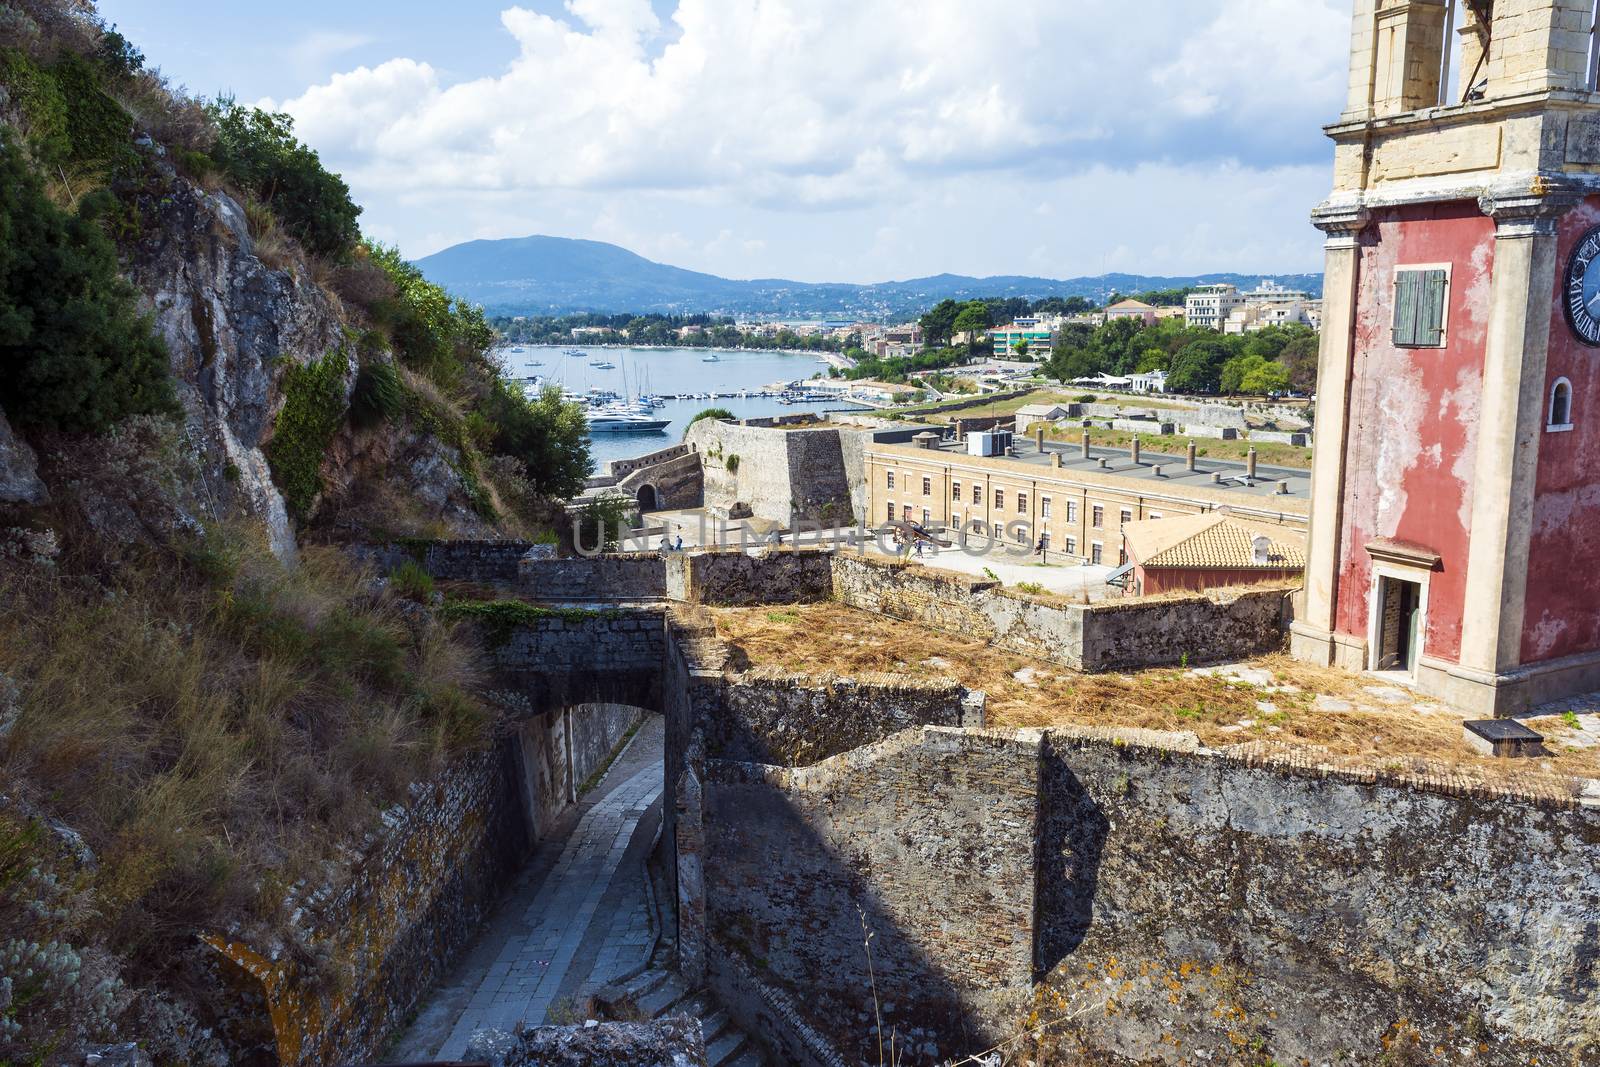 Abandoned clock tower in old fortress in Corfu with panoramic view of Corfu town, Greece. by ankarb